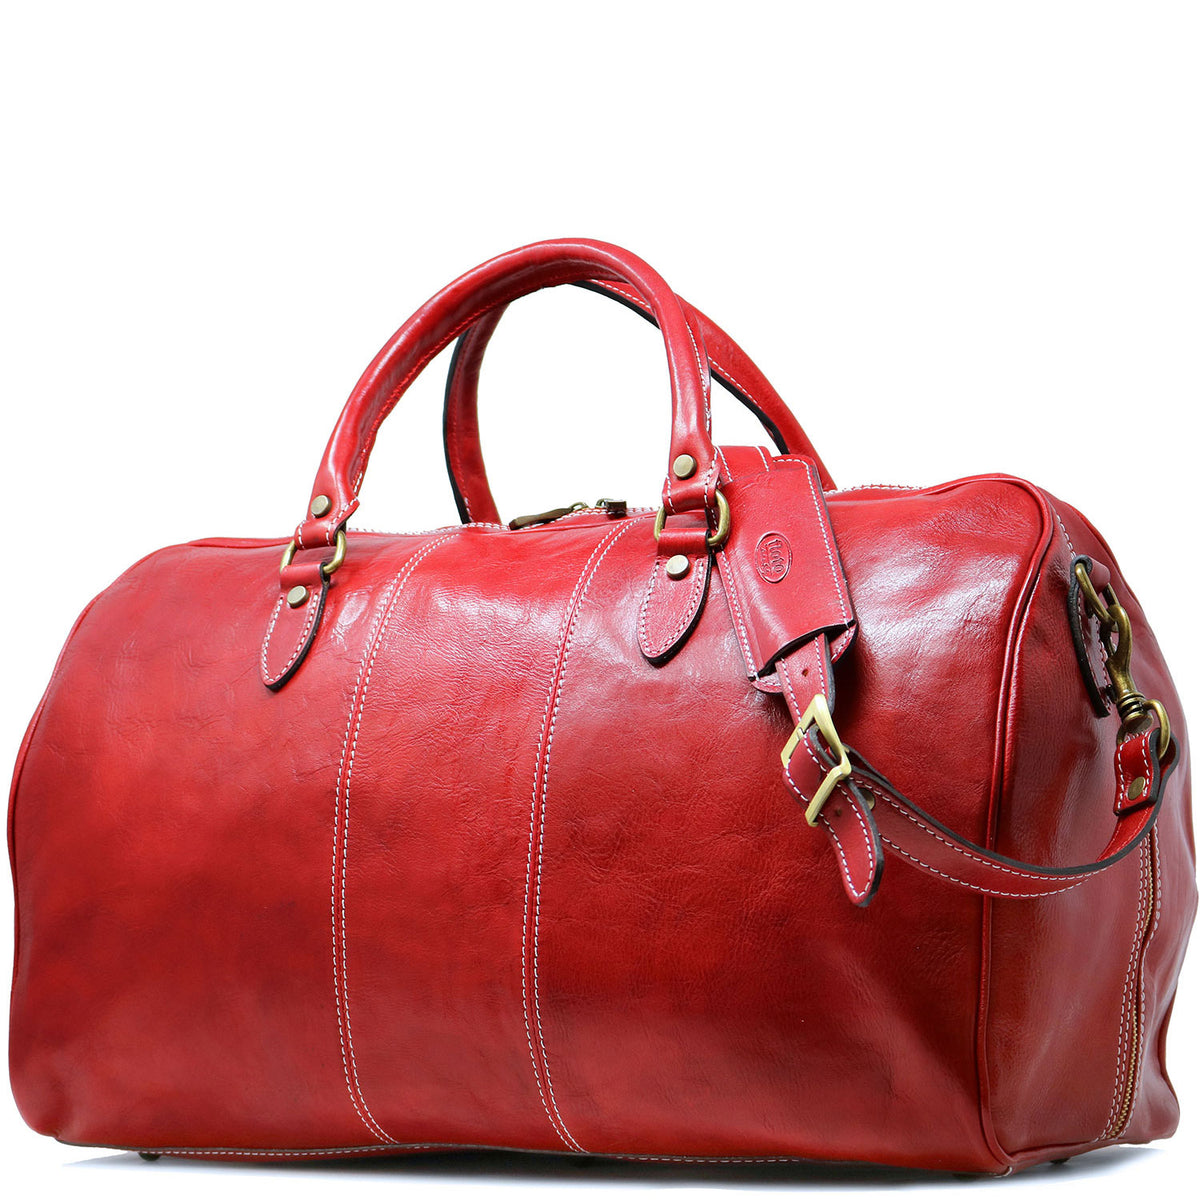 CLUCI Duffel Bag for Travel Leather Women Weekender Bag Carry on Trave